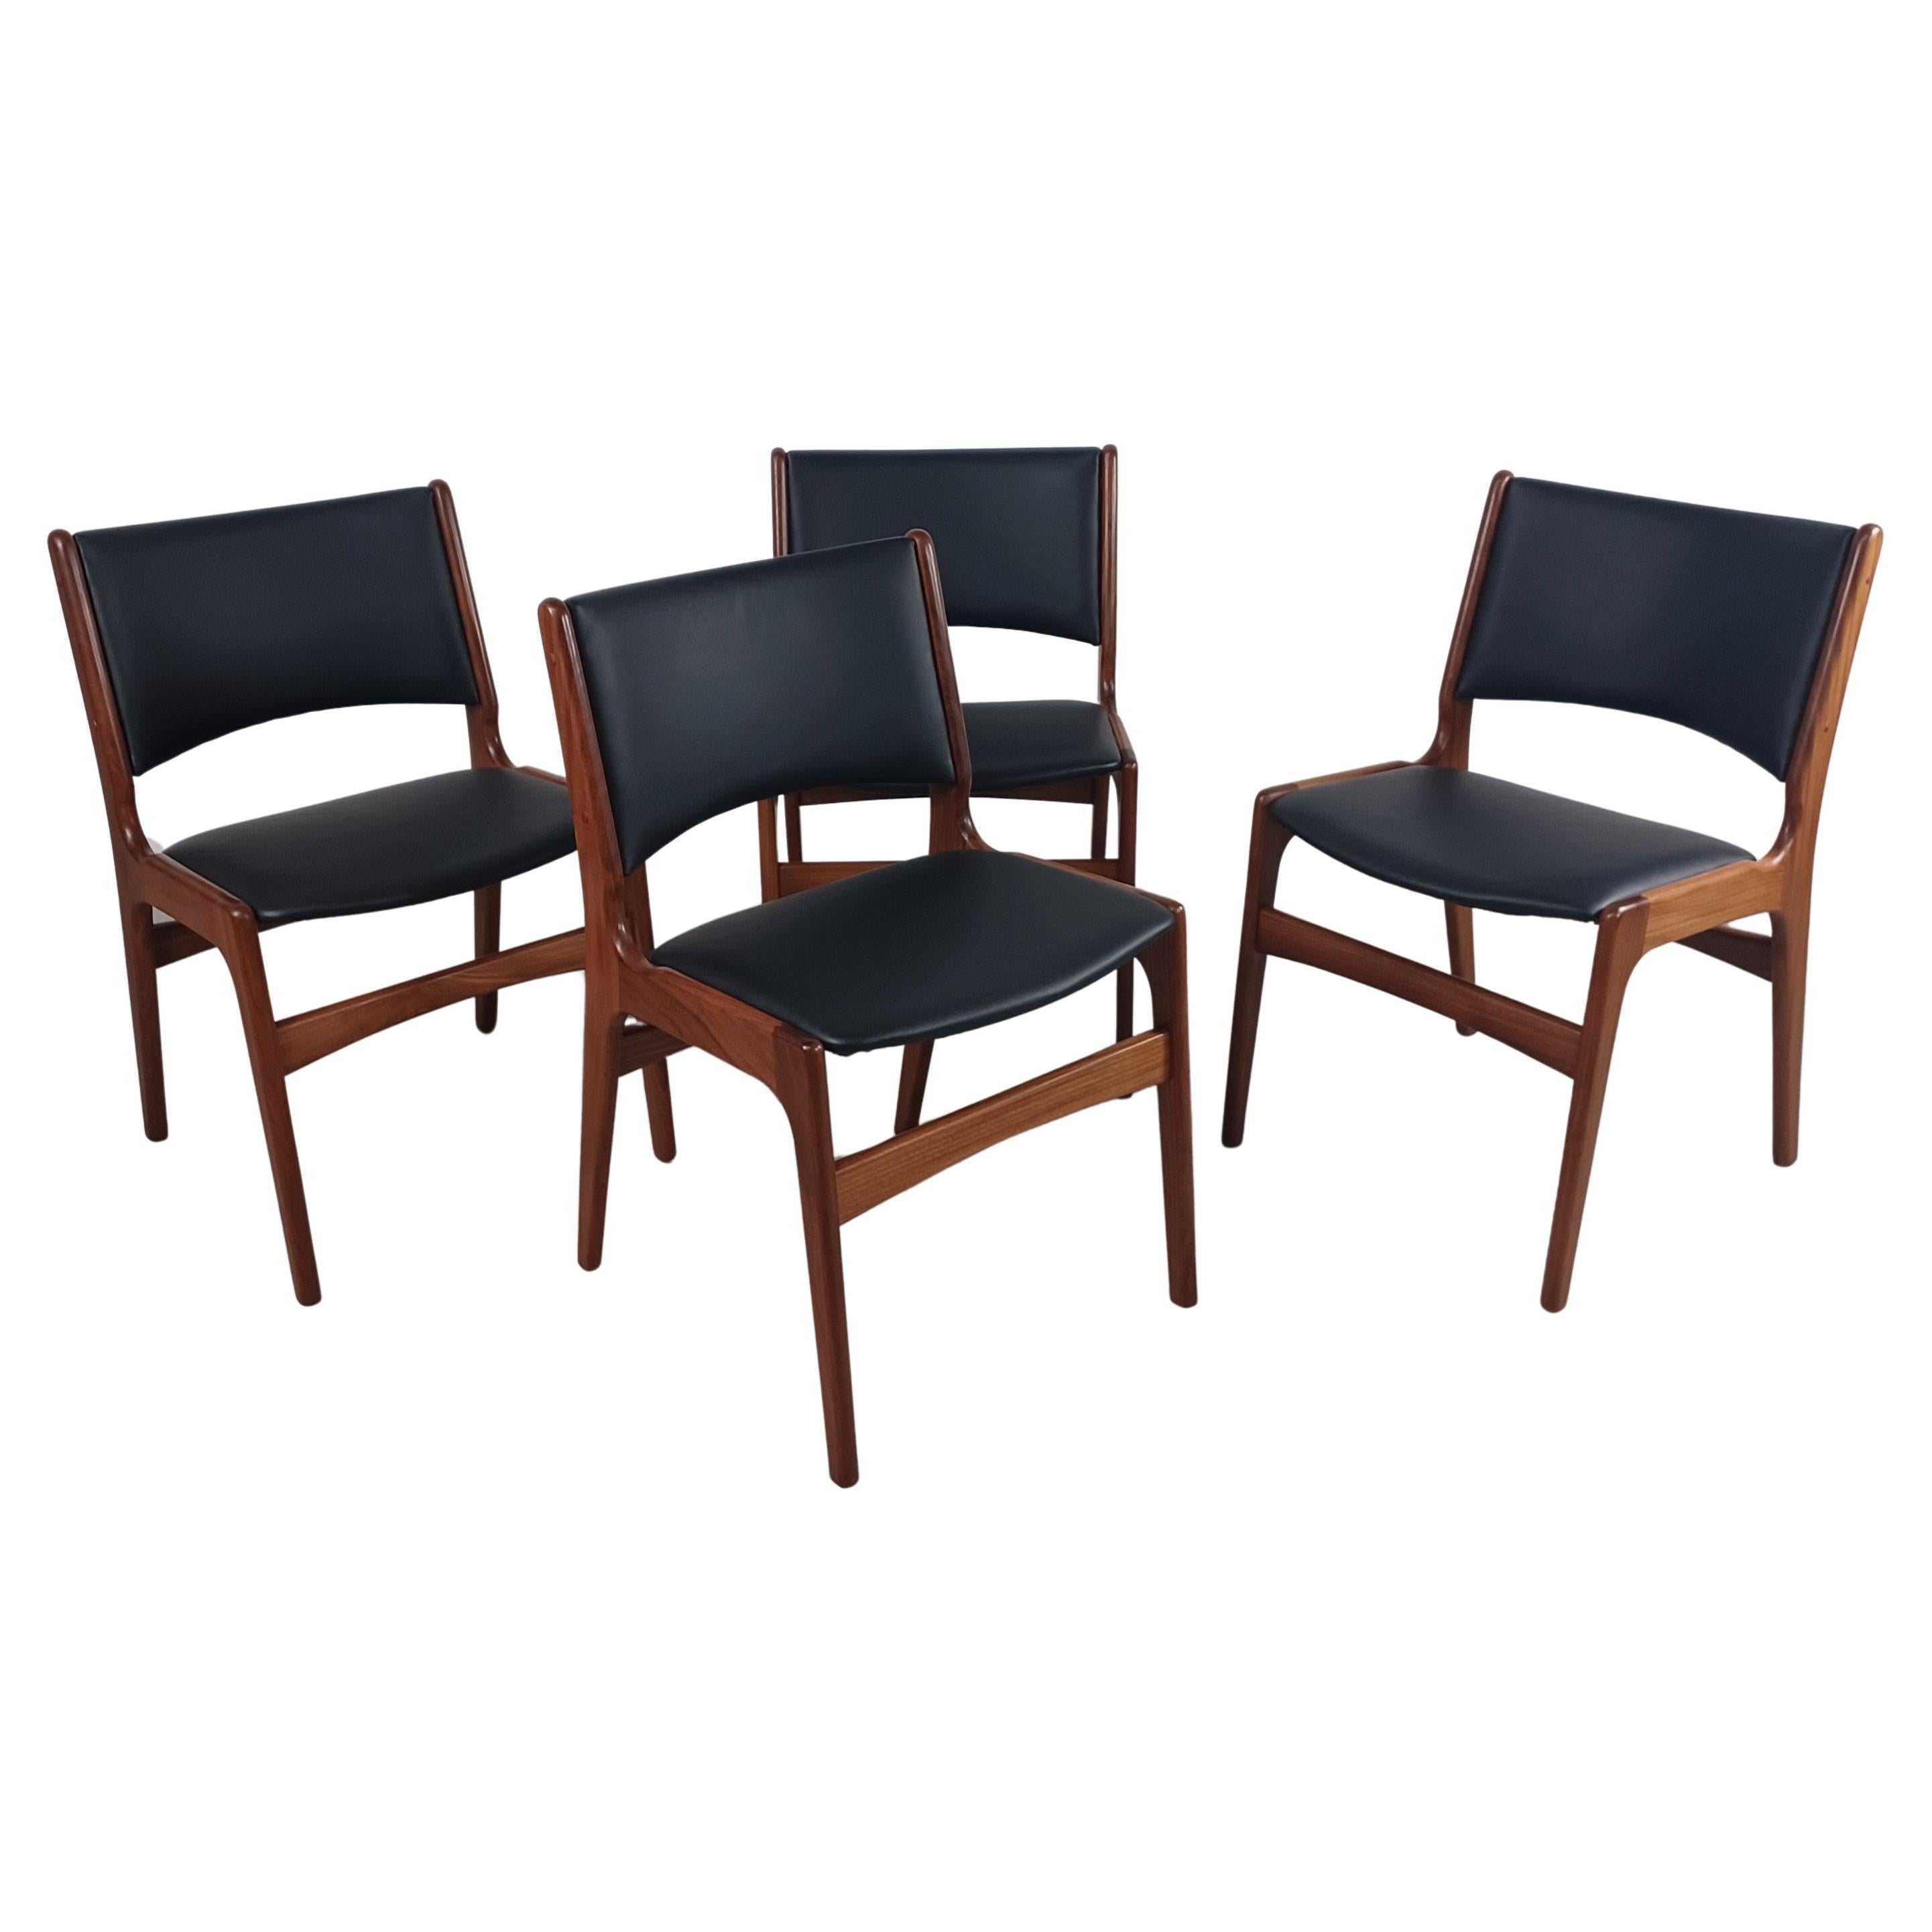 Four Restored Danish Erik Buch Teak Dining Chairs Including Custom Reupholstery For Sale